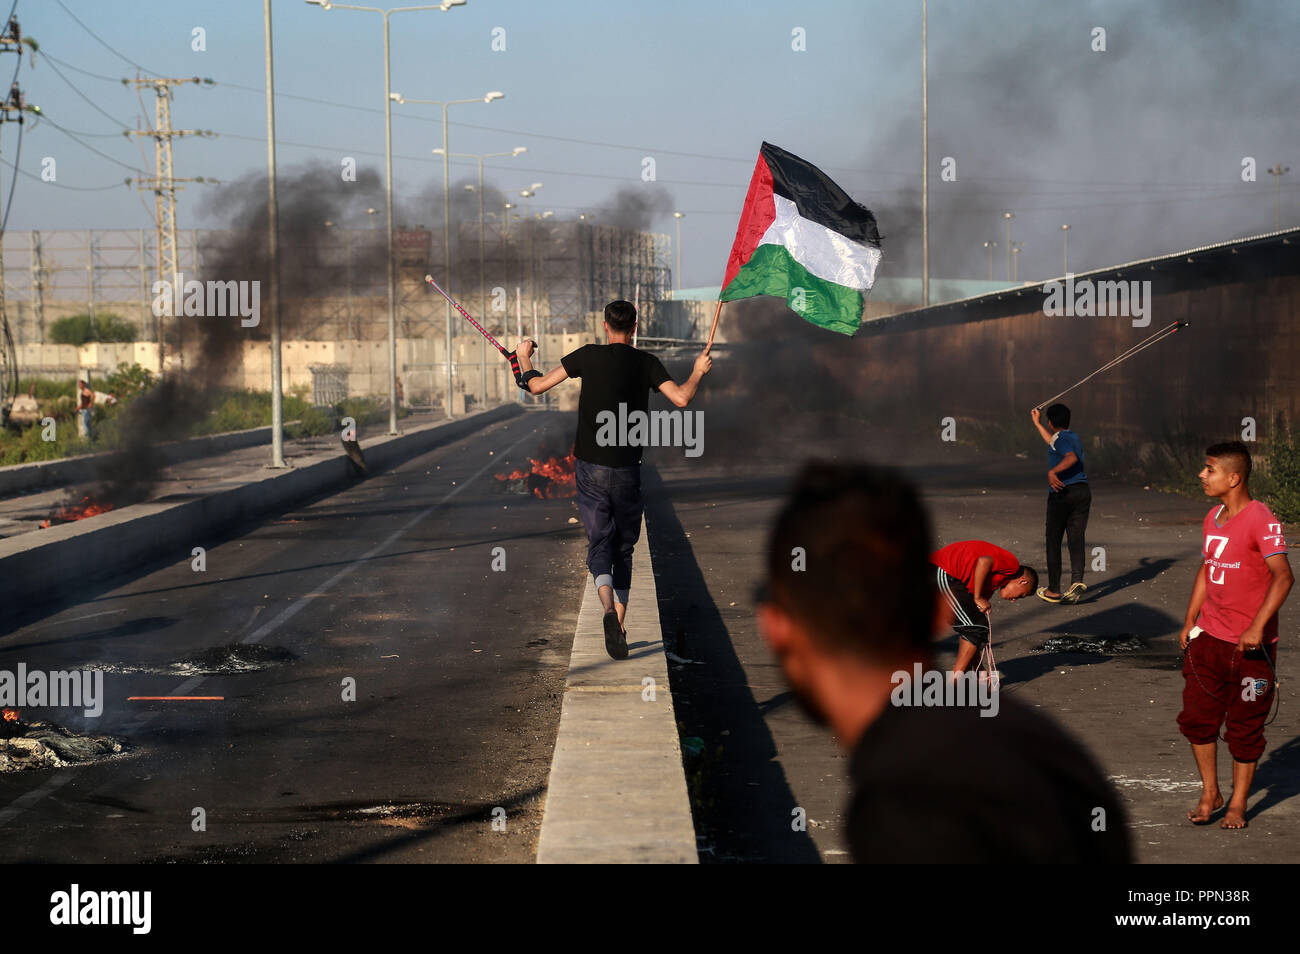 Gaza. 26th Sep, 2018. A Palestinian protester holds a Palestinian flag during clashes with Israeli troops after a protest at Erez crossing near the border with Israel, northern Gaza Strip, on Sept. 26, 2018. Credit: Stringer/Xinhua/Alamy Live News Stock Photo